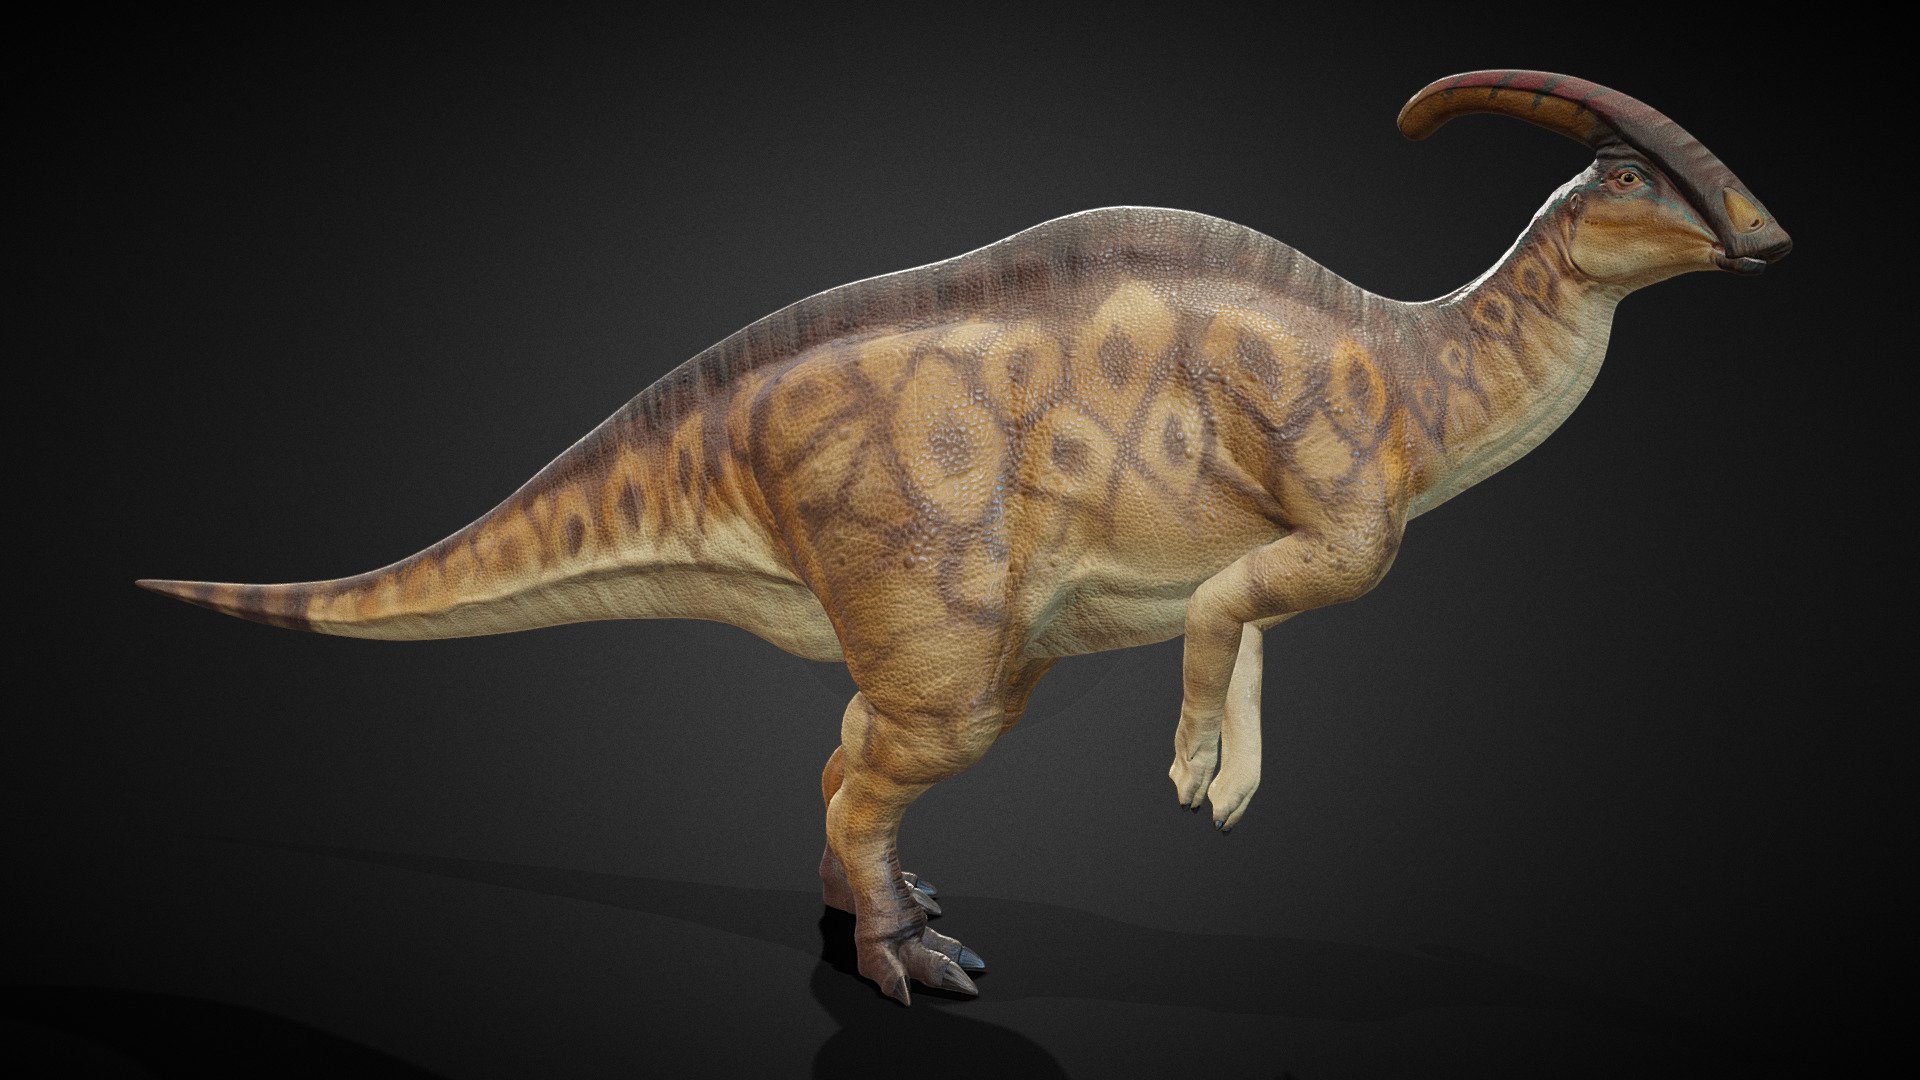 My new and improved 2022 Parasaurolophus model!

High-quality, custom designed, Parasaurolophus model, with 2 Level of Details available, Rigging and High-quality PBR 8K textures. Suitable for both game-asset, and cinematic animation.

Visit my portfolio for more images of the model and the product's package: https://www.artstation.com/artwork/X10RbY

The native file type is BLEND as it was created with Blender, however with OBJ, FBX as well as PBR textures provided, it will work with any 3D programs.

In this package includes:



Blender file (.BLEND) with armature rigging, proper materials and PBR textures set up.



PBR textures in 8K, including these maps: Color, Roughness, Normal map. Skins include Male and Female version.



OBJ and FBX files.



Thank you for your support of my products and look out for more soon 3d model